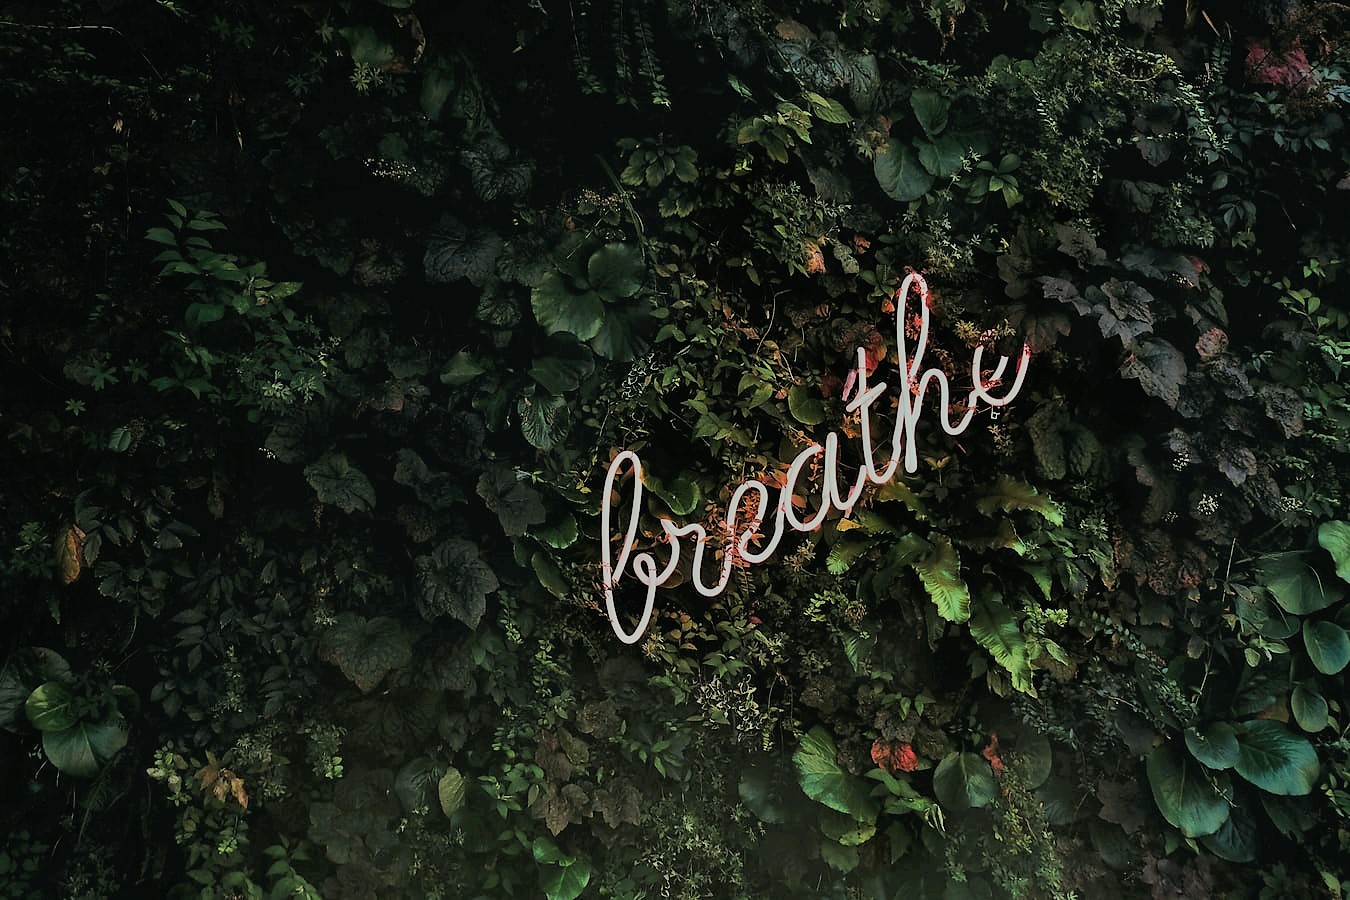 Breathe, Time to Think courses like Press Press encourage you to advance your deep skills, like breathing and listening to reenergise the way you work.